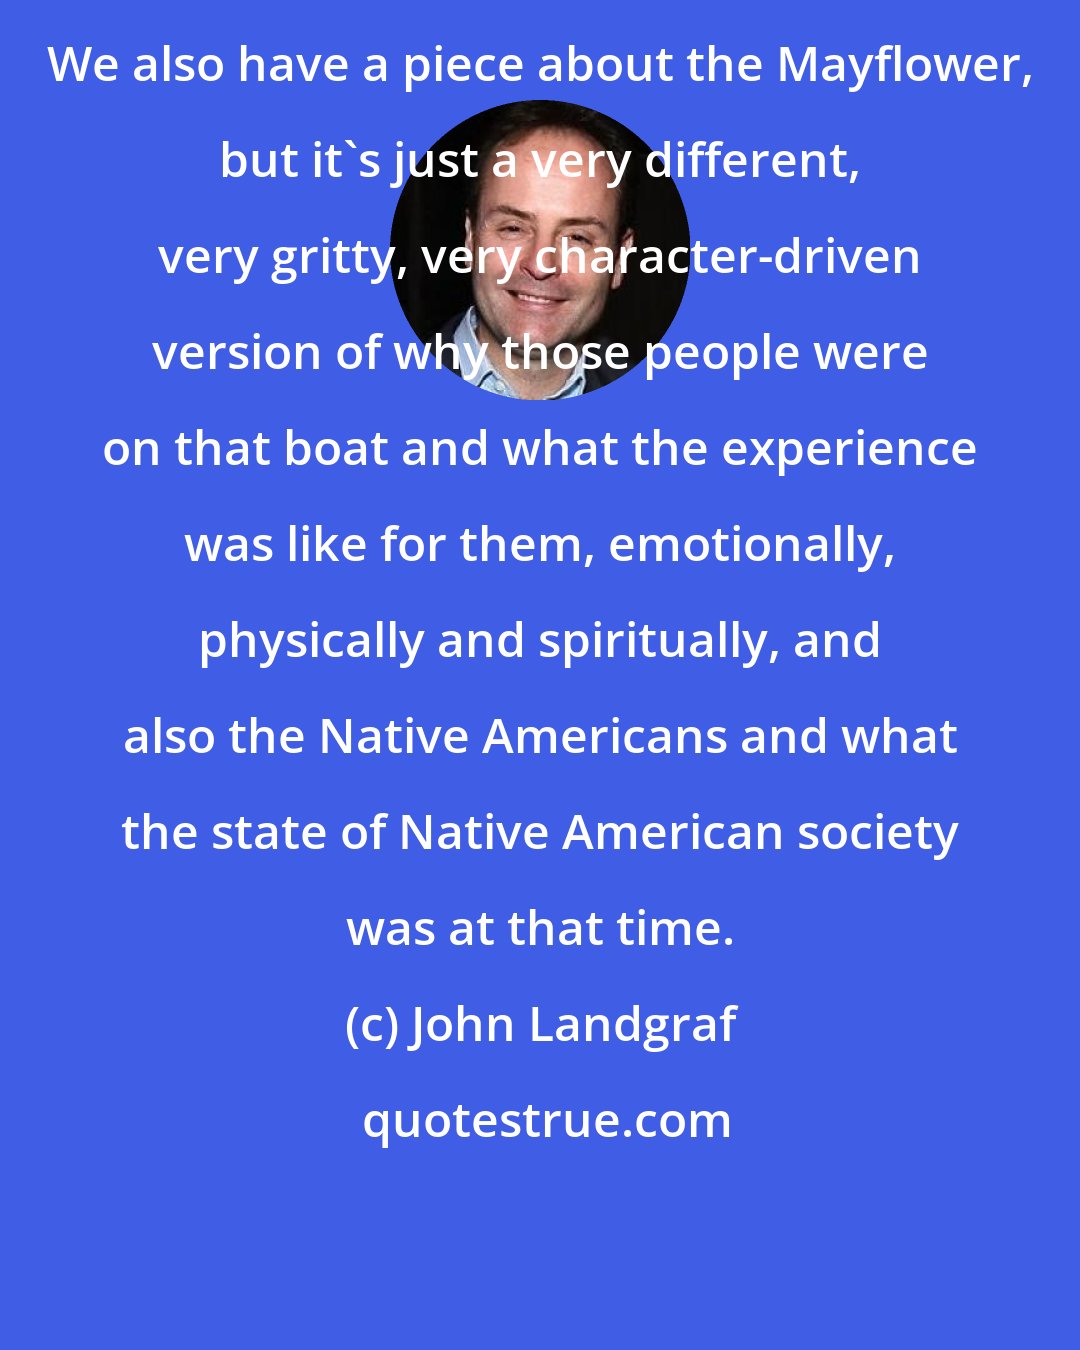 John Landgraf: We also have a piece about the Mayflower, but it's just a very different, very gritty, very character-driven version of why those people were on that boat and what the experience was like for them, emotionally, physically and spiritually, and also the Native Americans and what the state of Native American society was at that time.